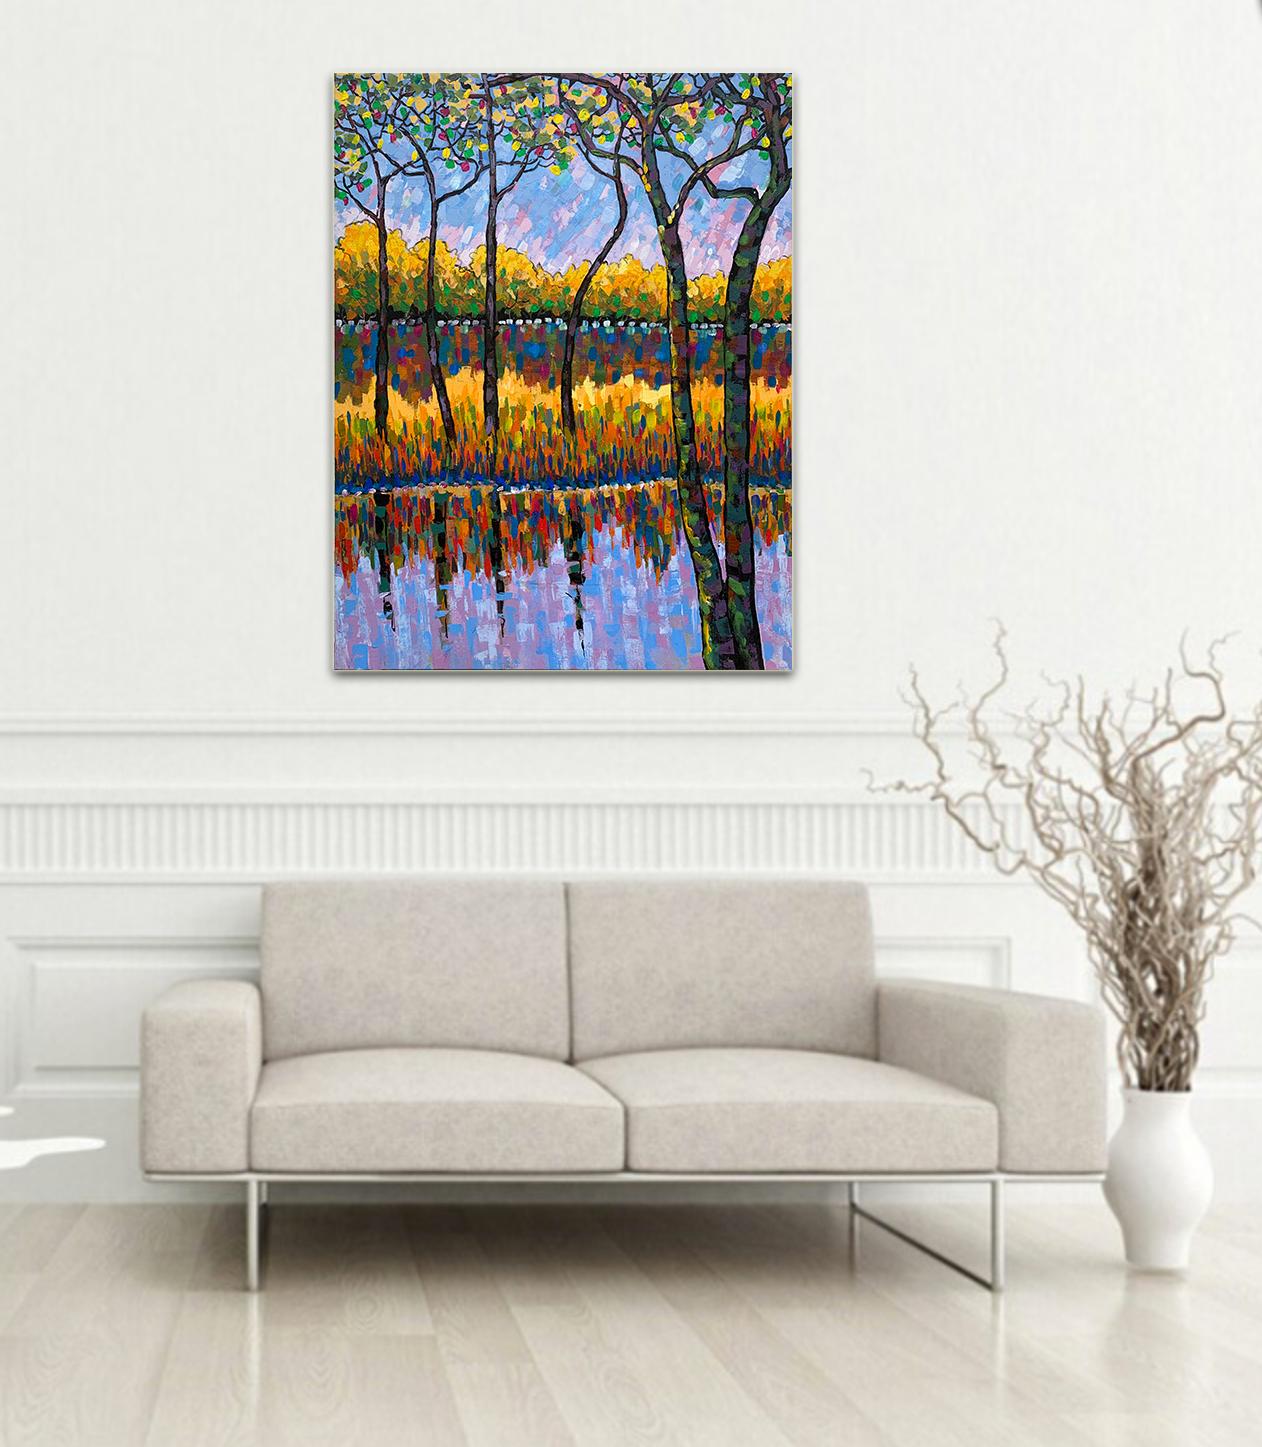 Water Reflections by Katharina Husslein - Water Reflections Impressionist Nature 3